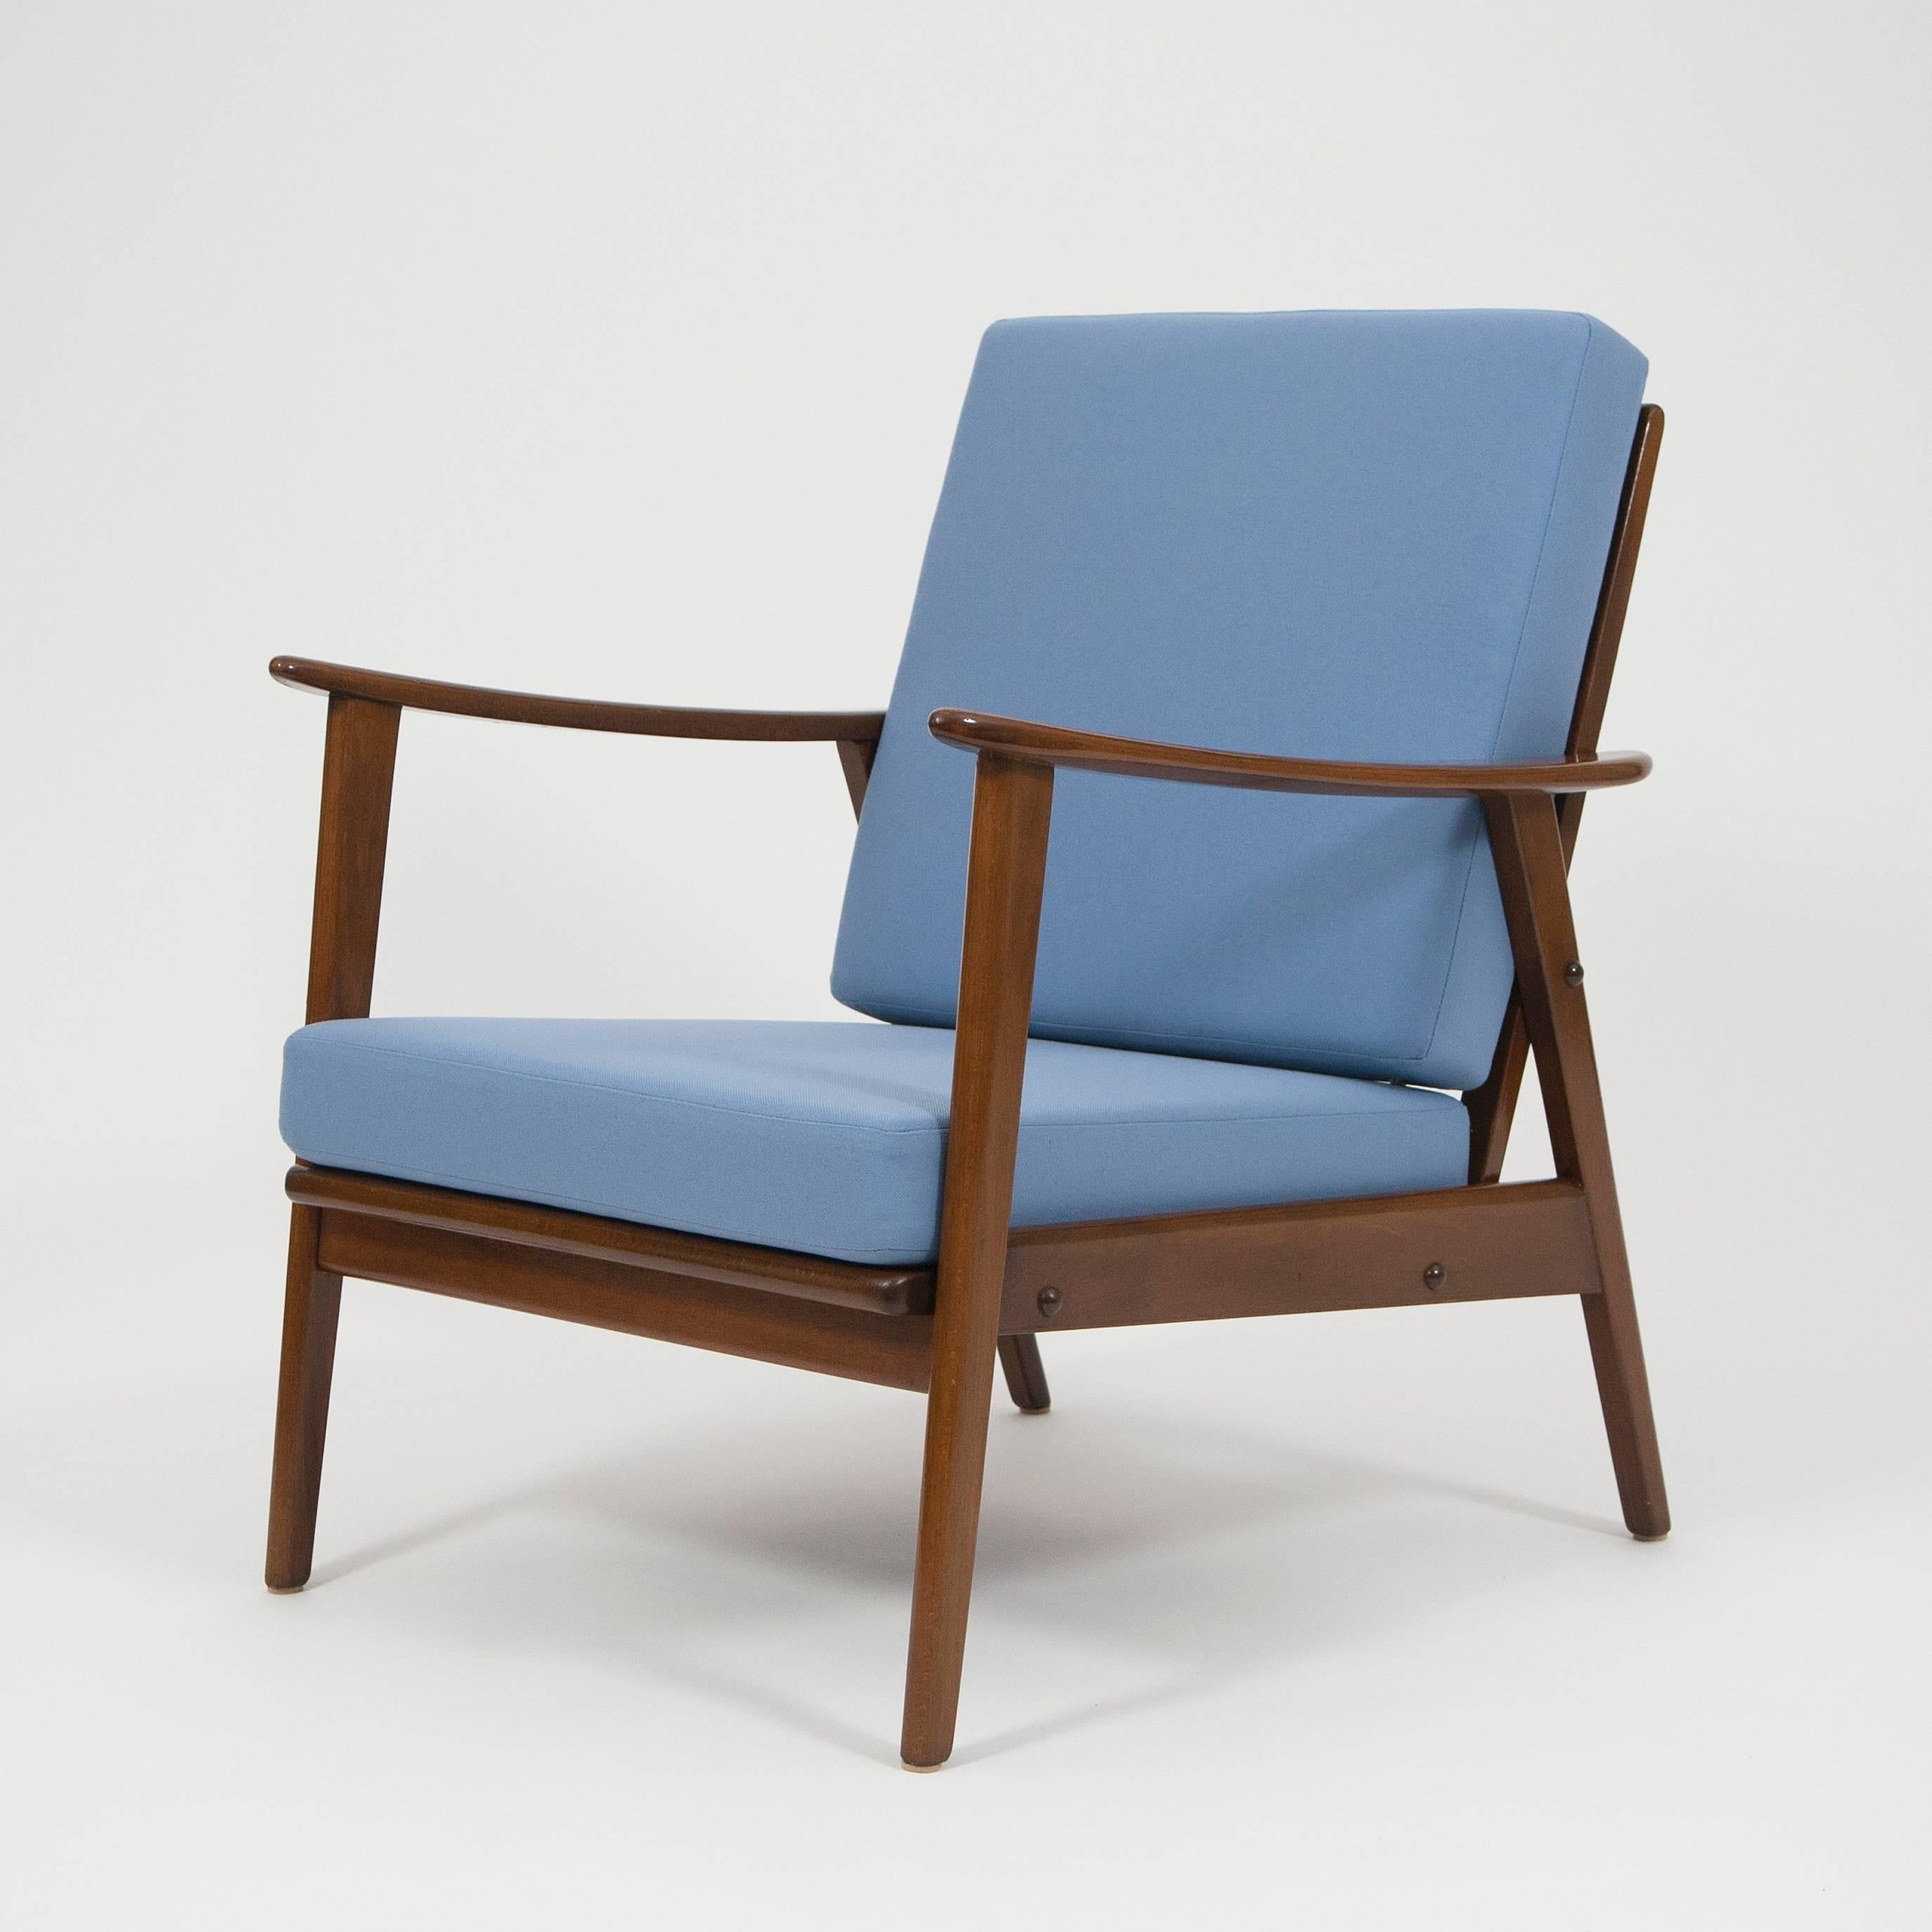 Walnut Pair of Mid-Century Modern Easy Chairs, Germany, 1960